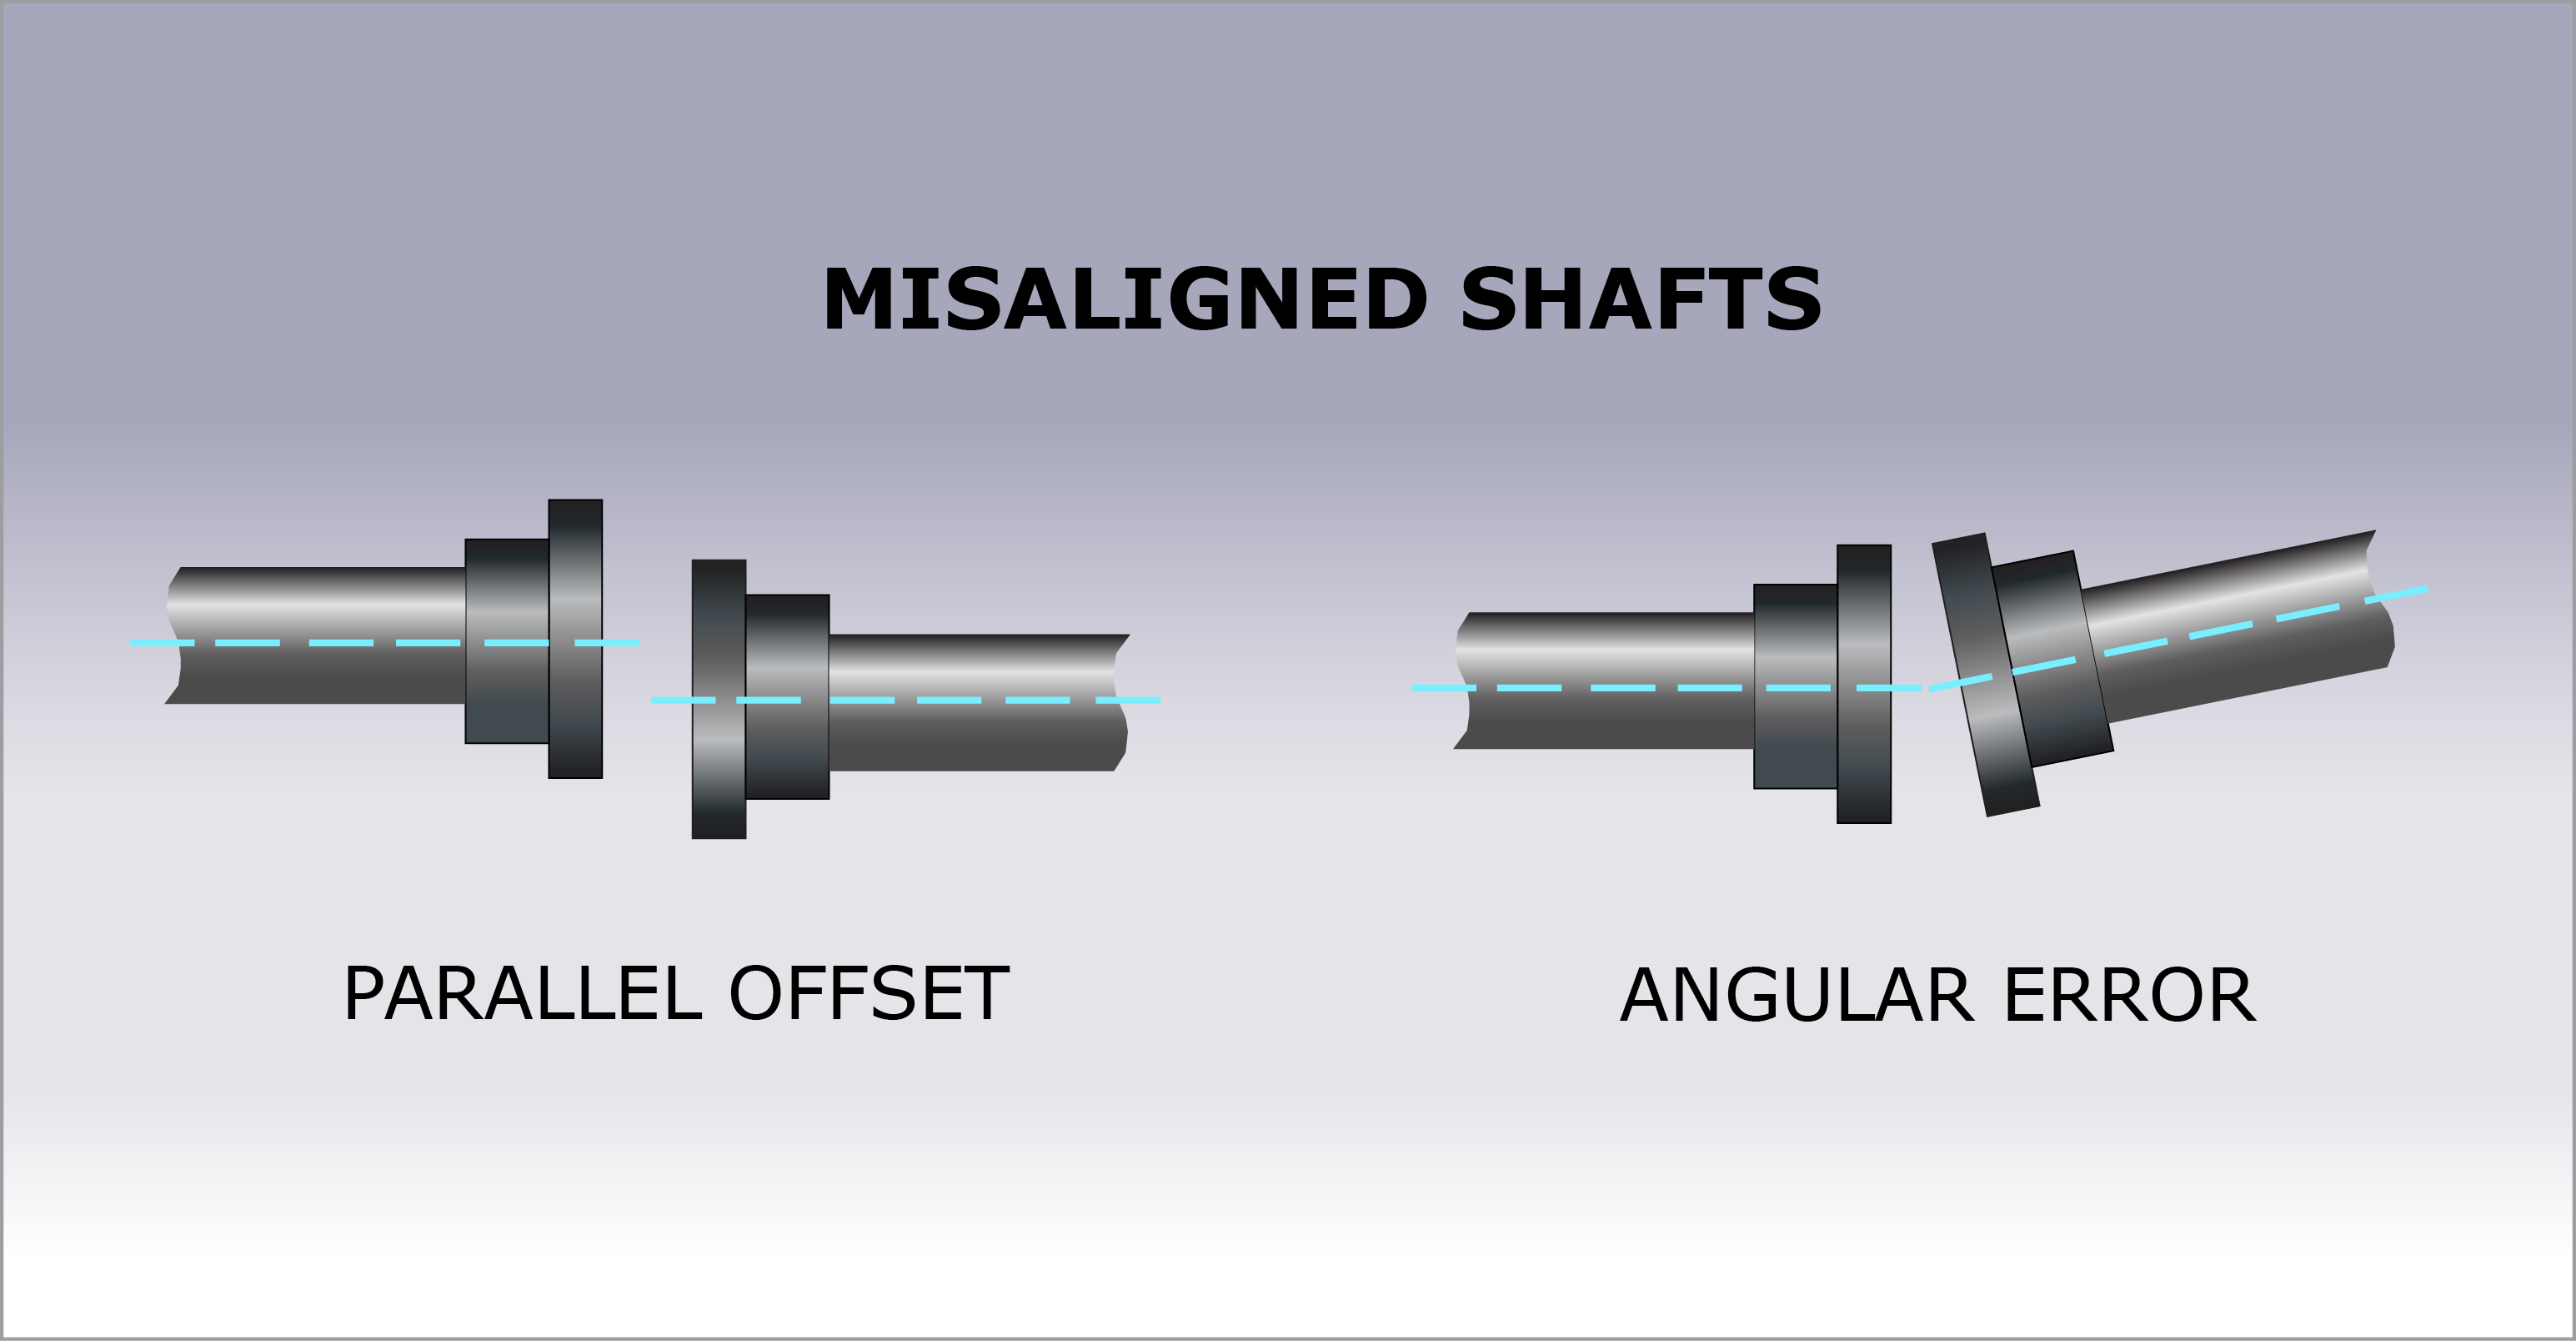 Image shows two types of misaligned shafts, the first type is a parallel offset and the second type is angular error